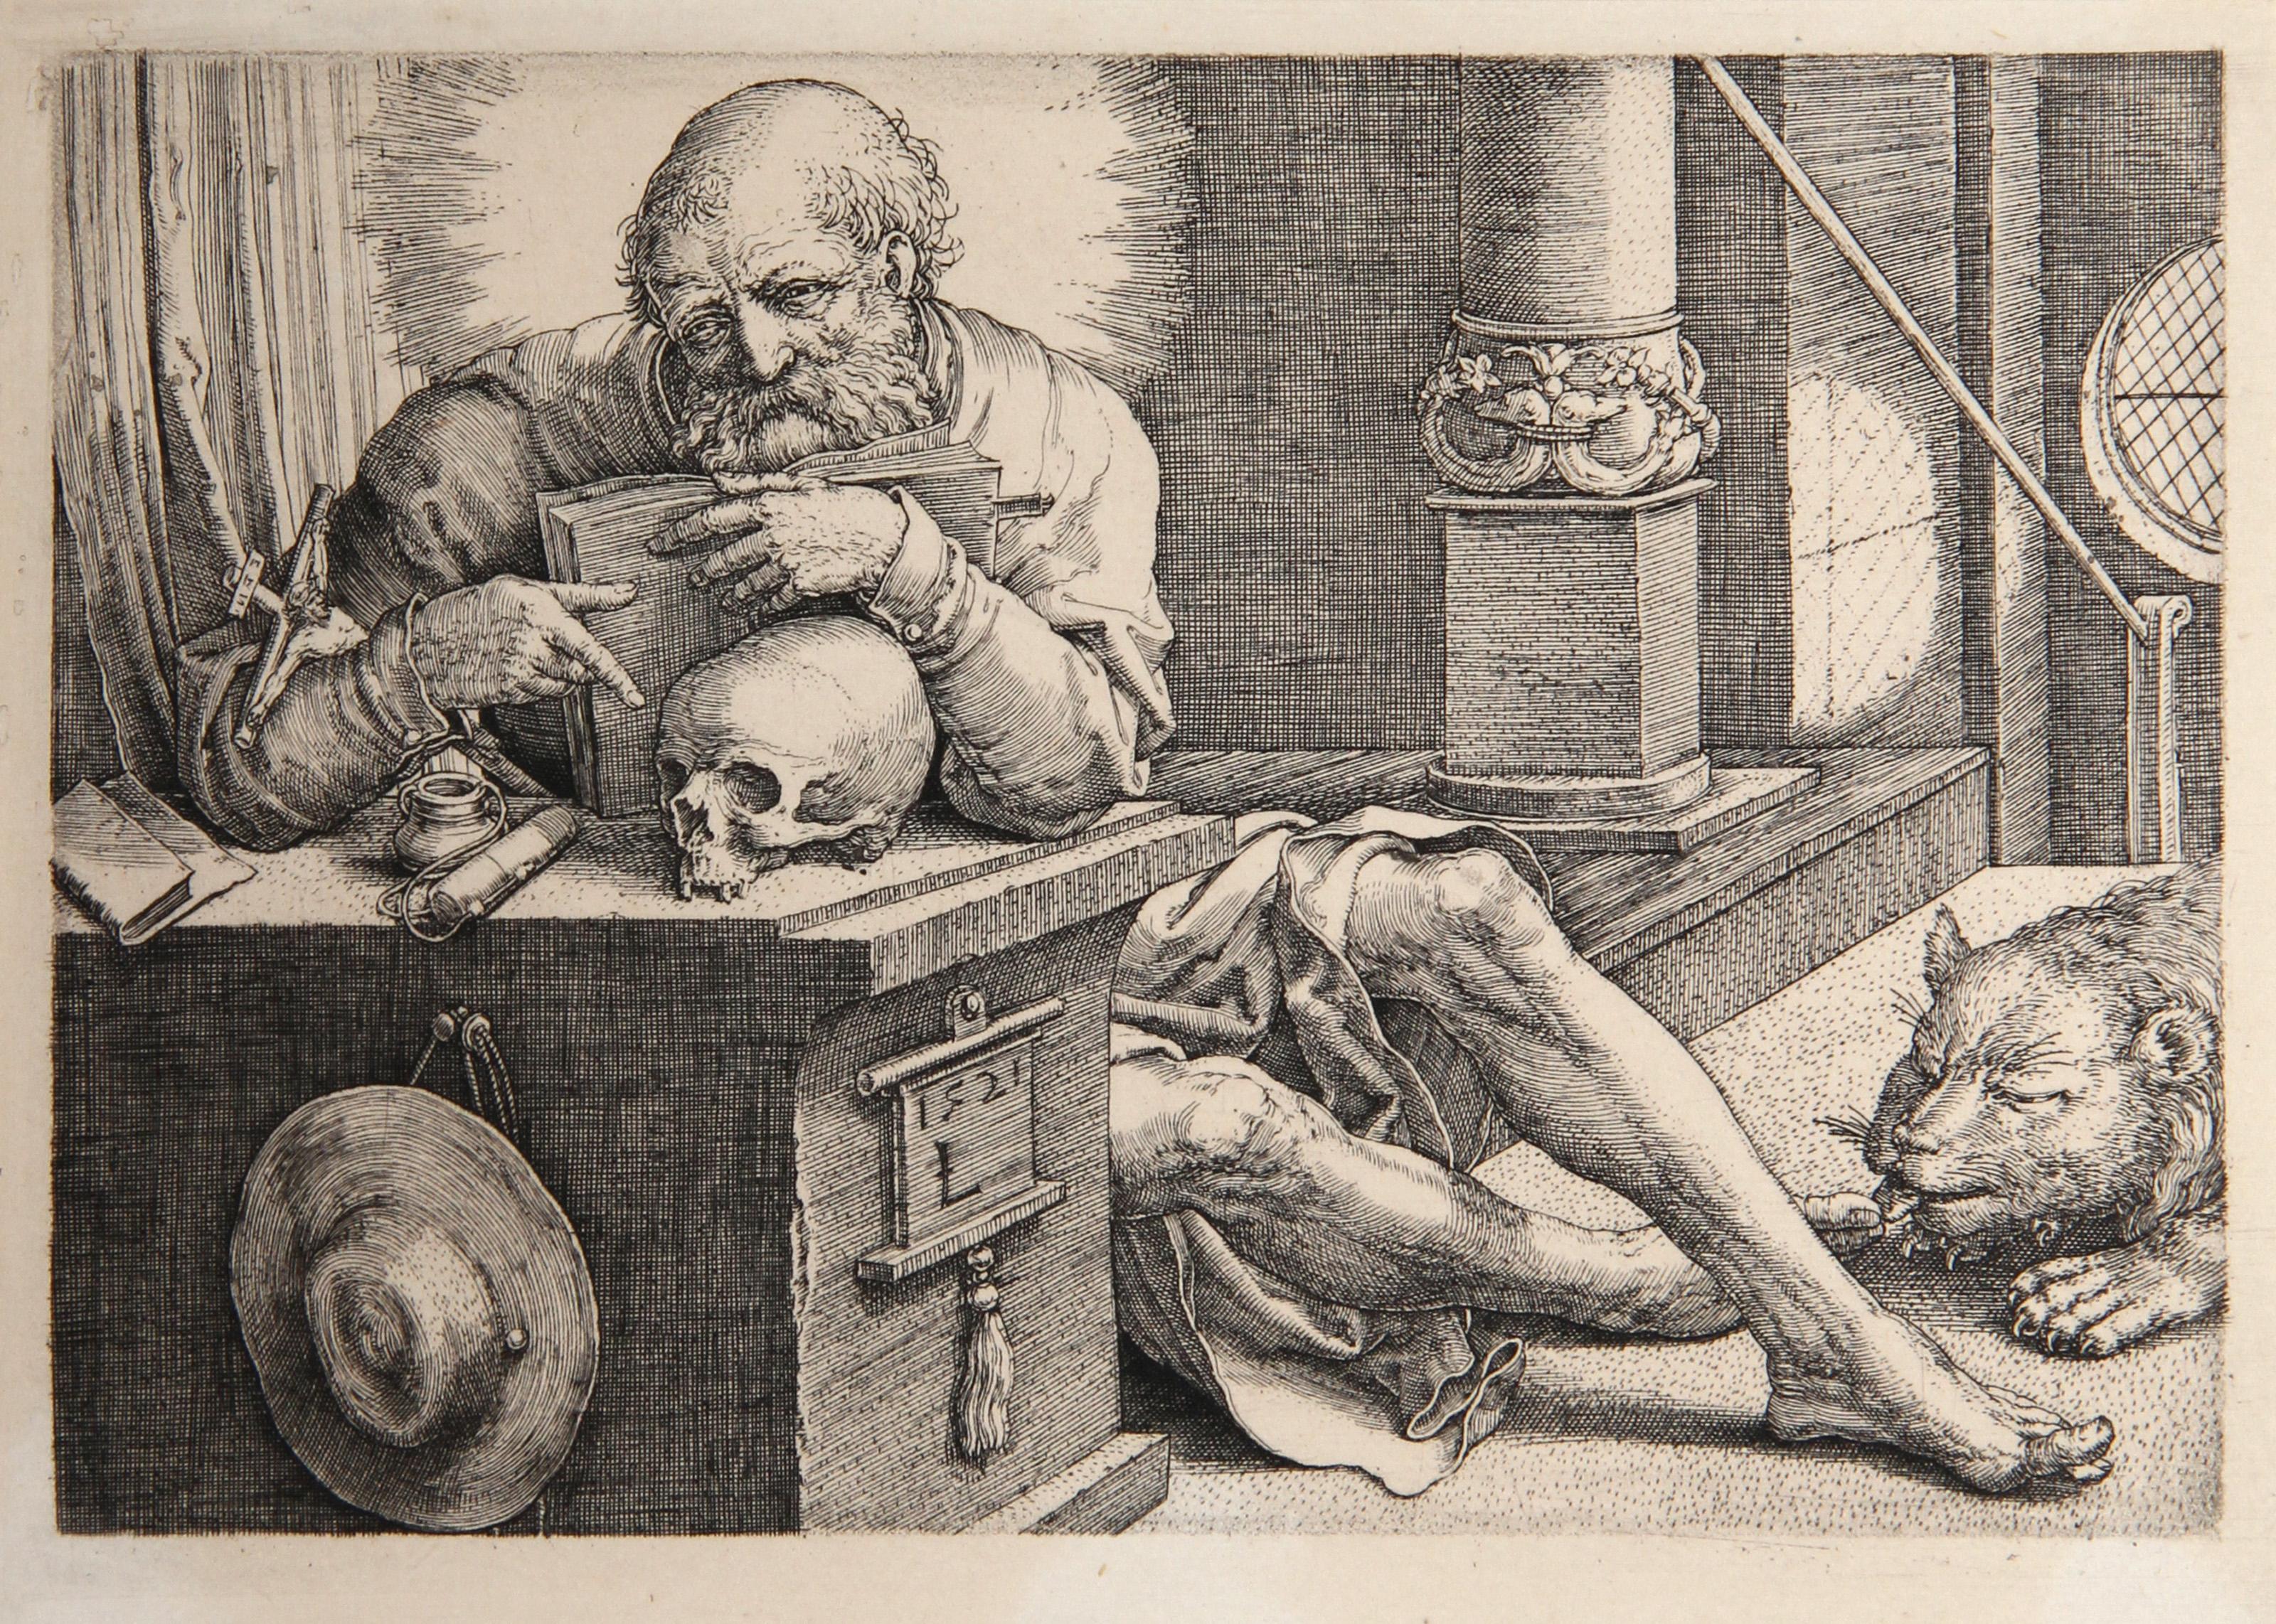 Artist: Lucas van Leyden, After by Amand Durand, Dutch (1494 - 1533) - Saint Jerome, Year: 1873, Medium: Heliogravure, Size: 4.5  x 6 in. (11.43  x 15.24 cm), Printer: Amand Durand, Description: French Engraver and painter Charles Amand Durand,